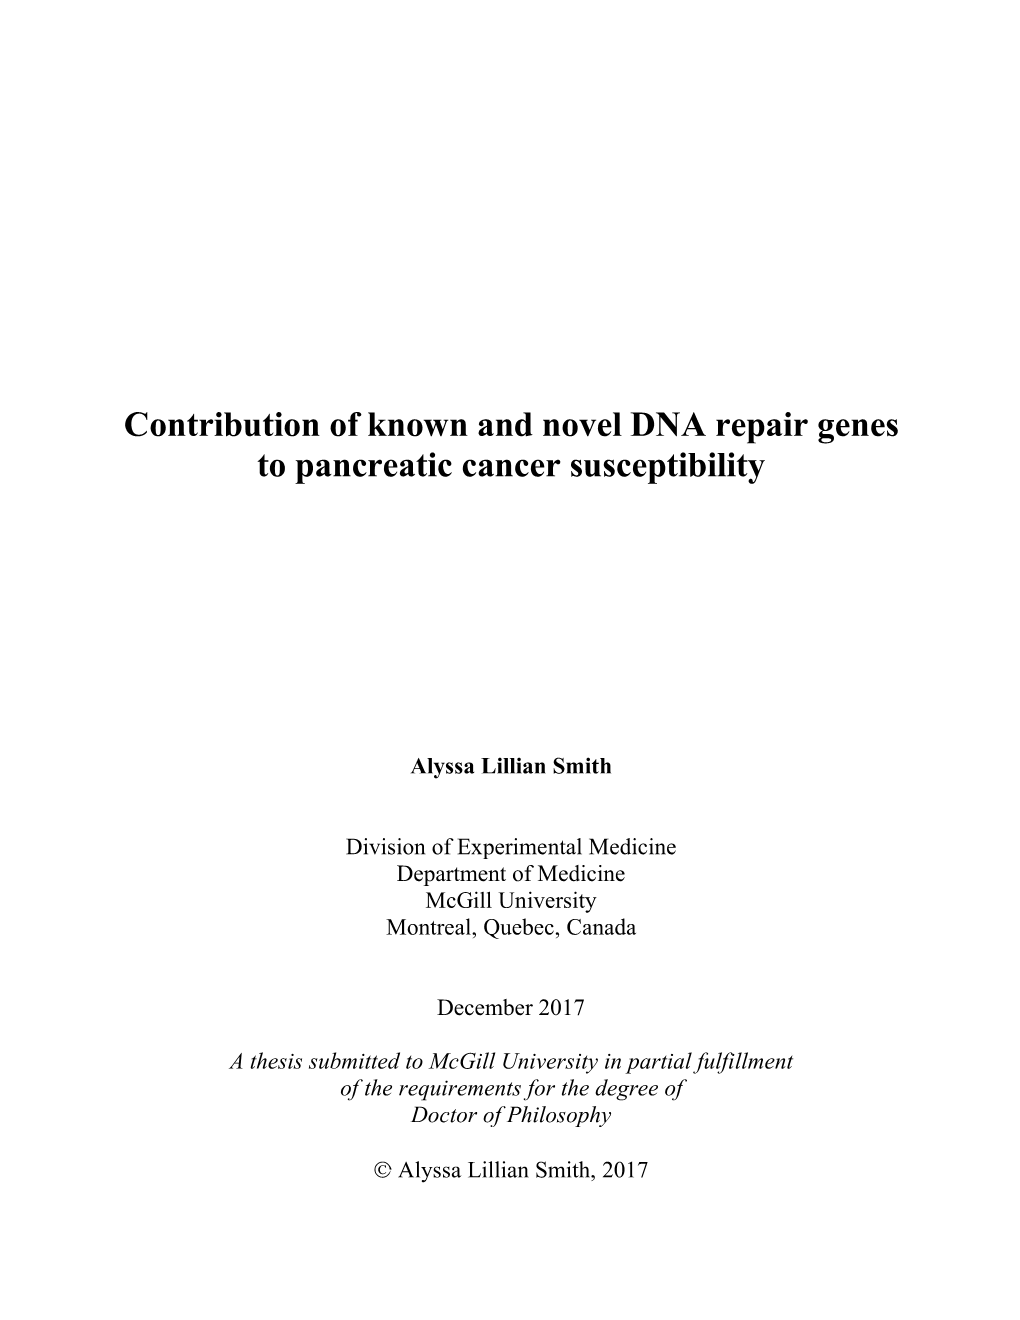 Contribution of Known and Novel DNA Repair Genes to Pancreatic Cancer Susceptibility